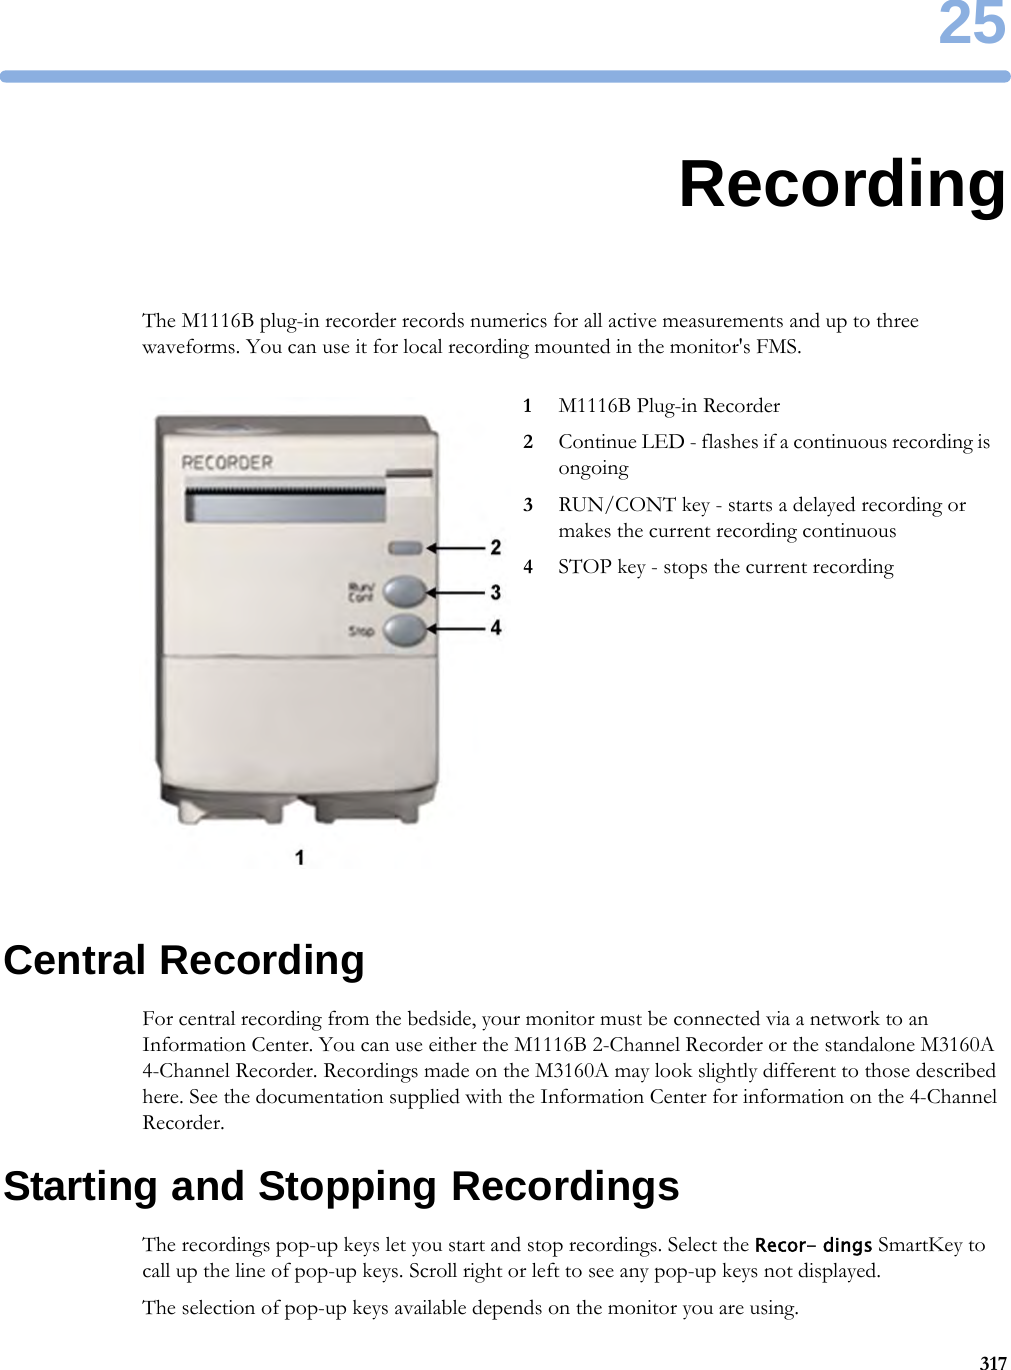 2531725RecordingThe M1116B plug-in recorder records numerics for all active measurements and up to three waveforms. You can use it for local recording mounted in the monitor&apos;s FMS.Central RecordingFor central recording from the bedside, your monitor must be connected via a network to an Information Center. You can use either the M1116B 2-Channel Recorder or the standalone M3160A 4-Channel Recorder. Recordings made on the M3160A may look slightly different to those described here. See the documentation supplied with the Information Center for information on the 4-Channel Recorder.Starting and Stopping RecordingsThe recordings pop-up keys let you start and stop recordings. Select the Recor- dings SmartKey to call up the line of pop-up keys. Scroll right or left to see any pop-up keys not displayed.The selection of pop-up keys available depends on the monitor you are using.1M1116B Plug-in Recorder2Continue LED - flashes if a continuous recording is ongoing3RUN/CONT key - starts a delayed recording or makes the current recording continuous4STOP key - stops the current recording